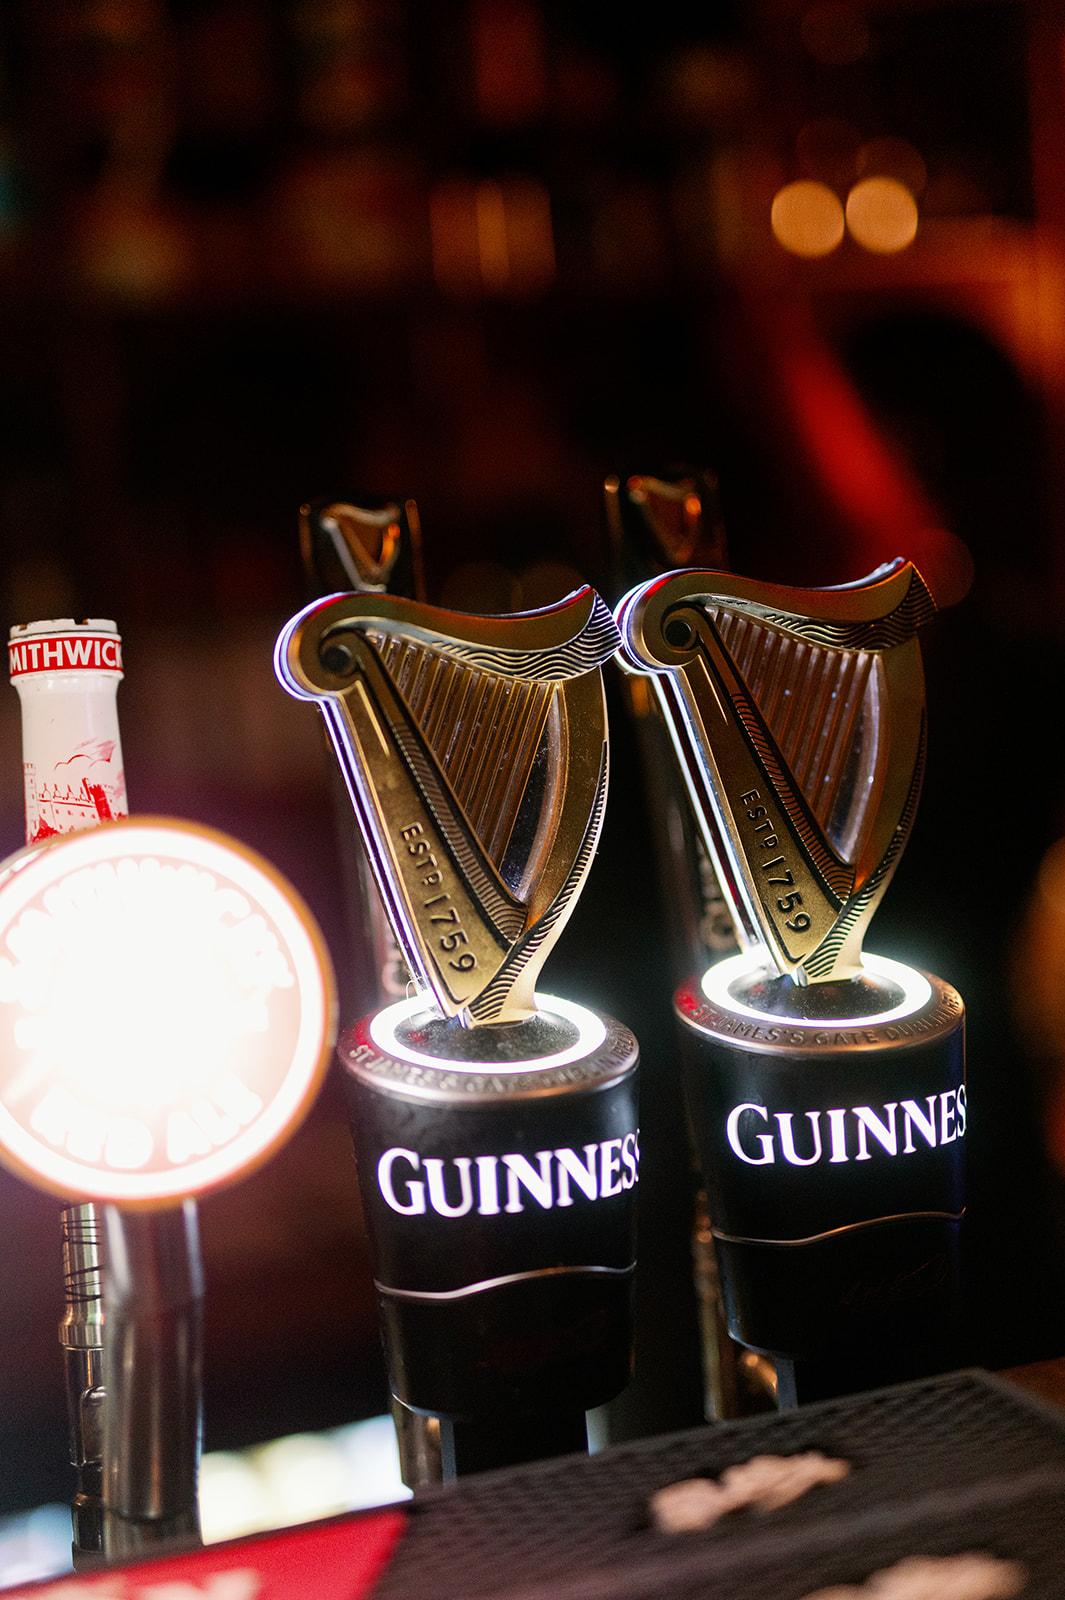 Guinness beer on tap.